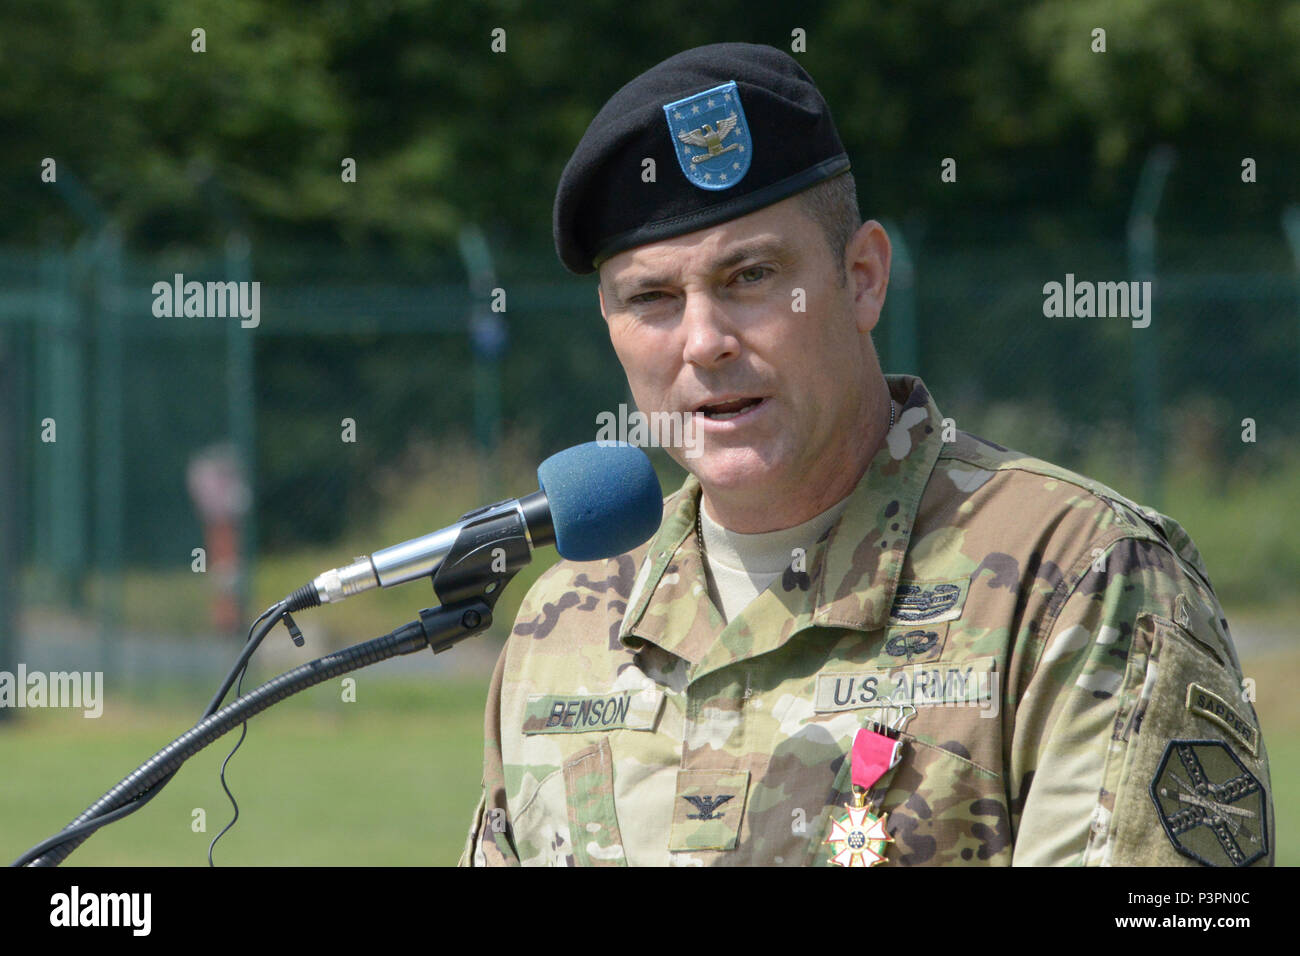 ANSBACH, Germany (July 21, 2016) – At the U.S. Army Garrison Ansbach change of command ceremony Monday at Barton Barracks here, Col. Christopher M. Benson, outgoing garrison commander, speaks to ceremony attendees. Stock Photo